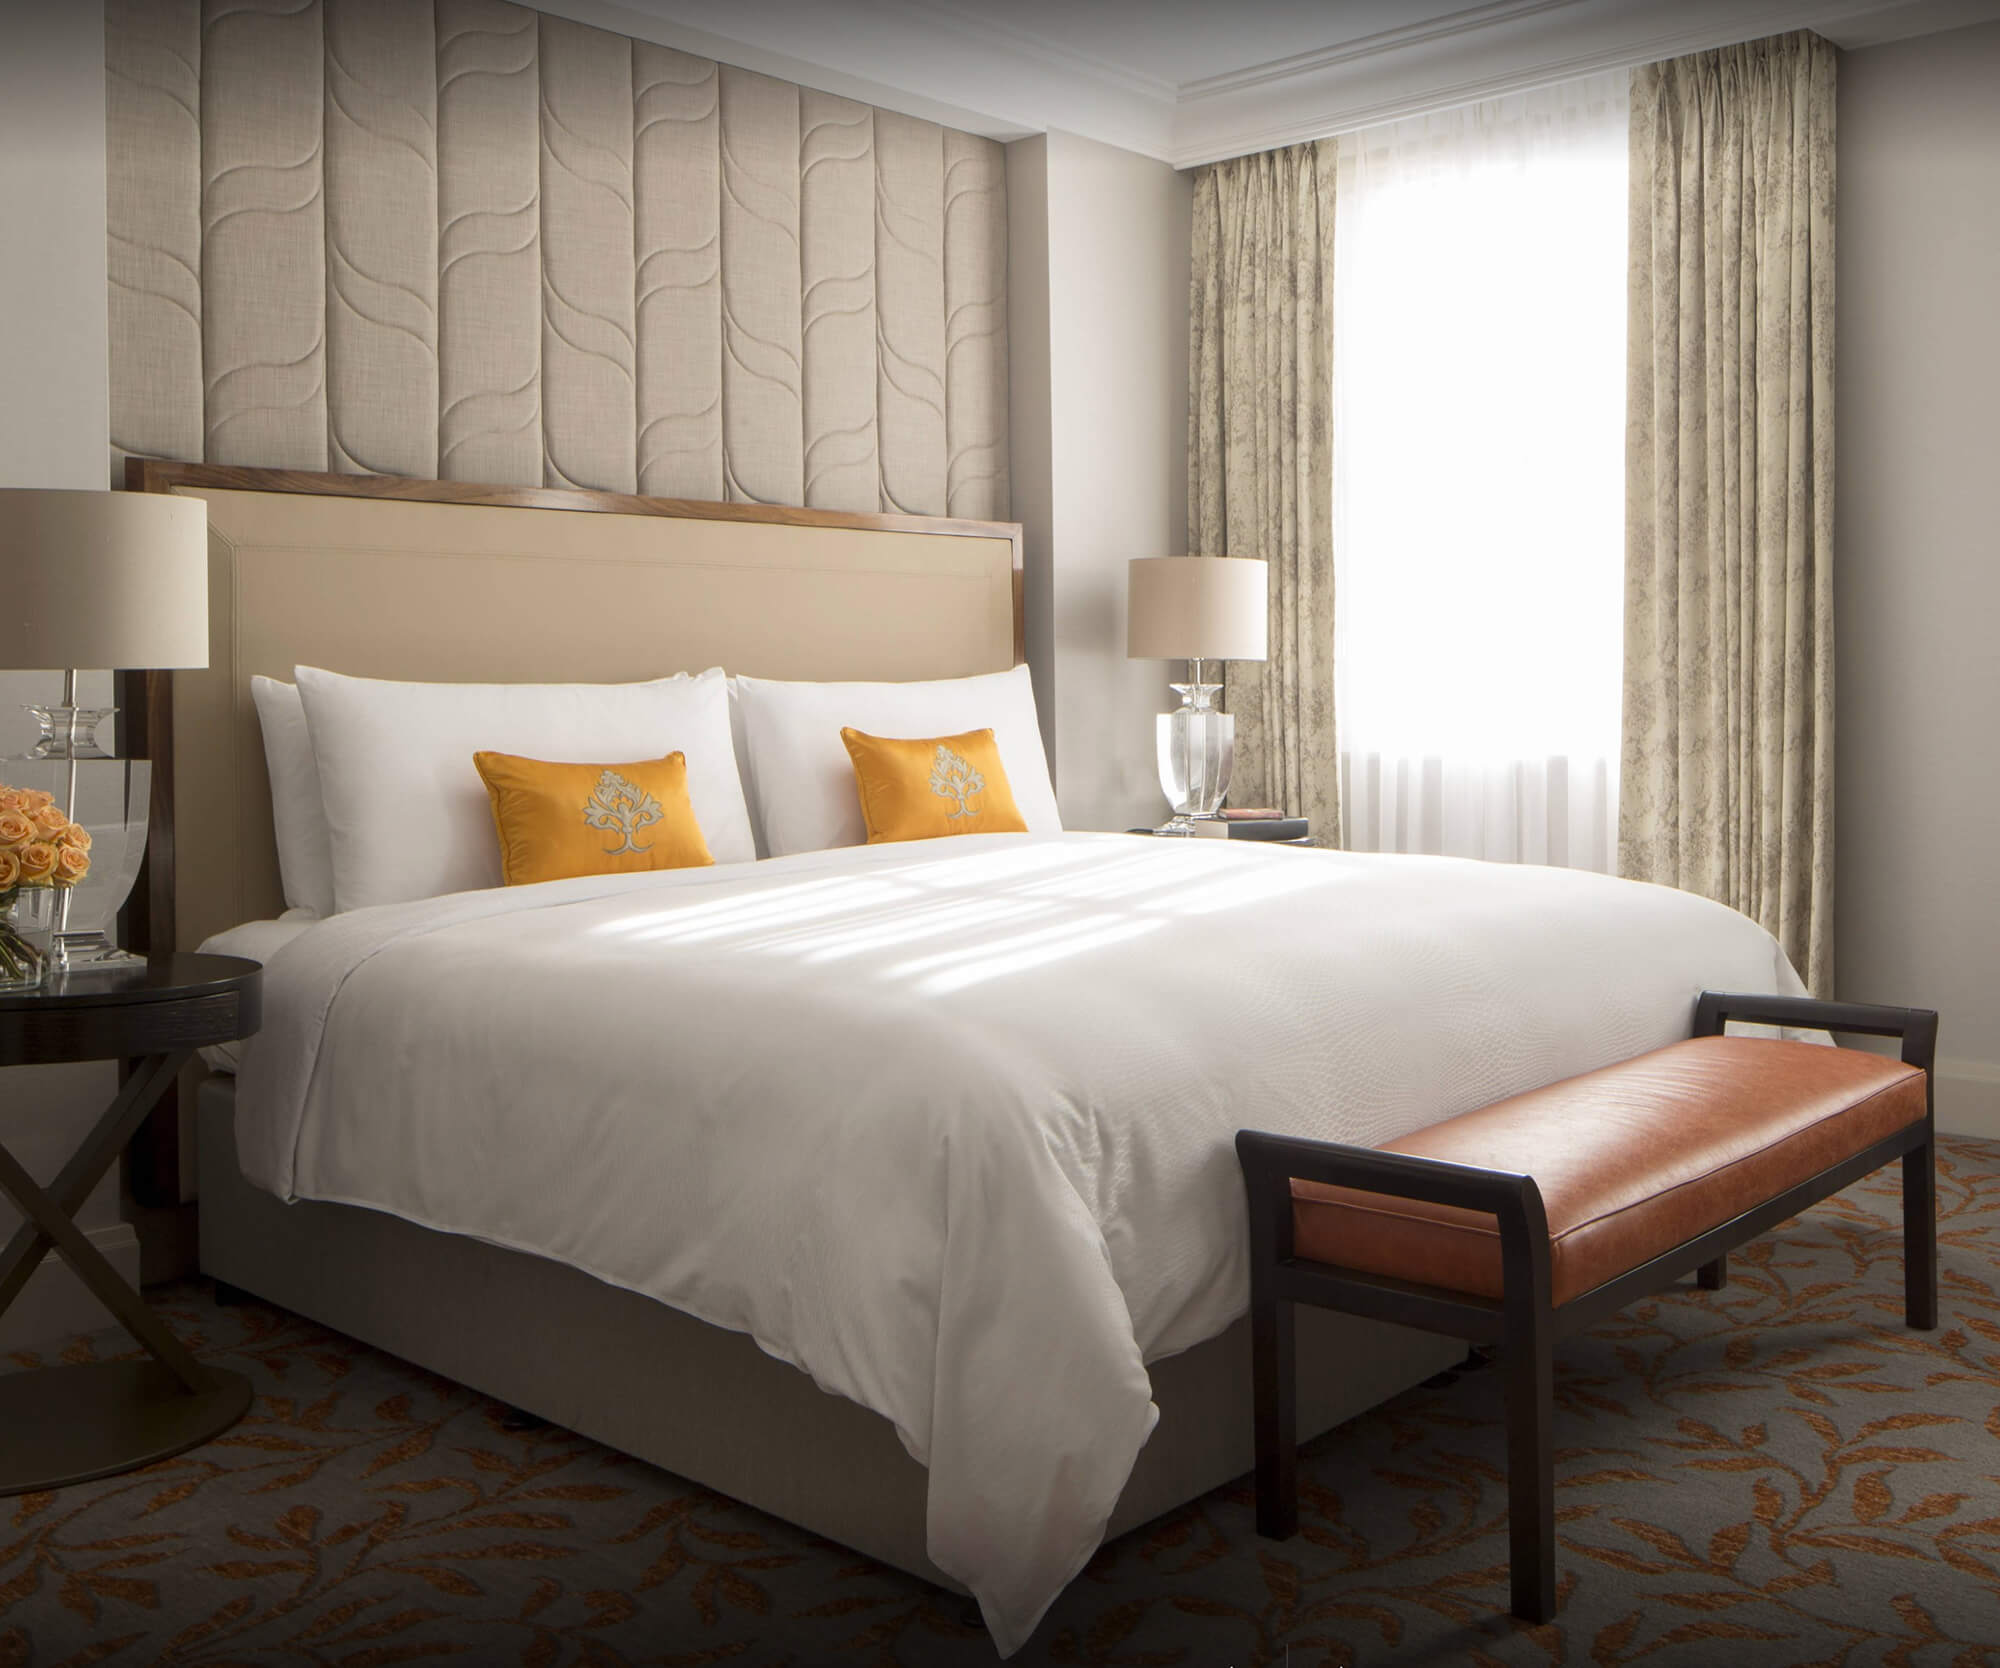 Background And Case Study: Marriott Bedding Plan